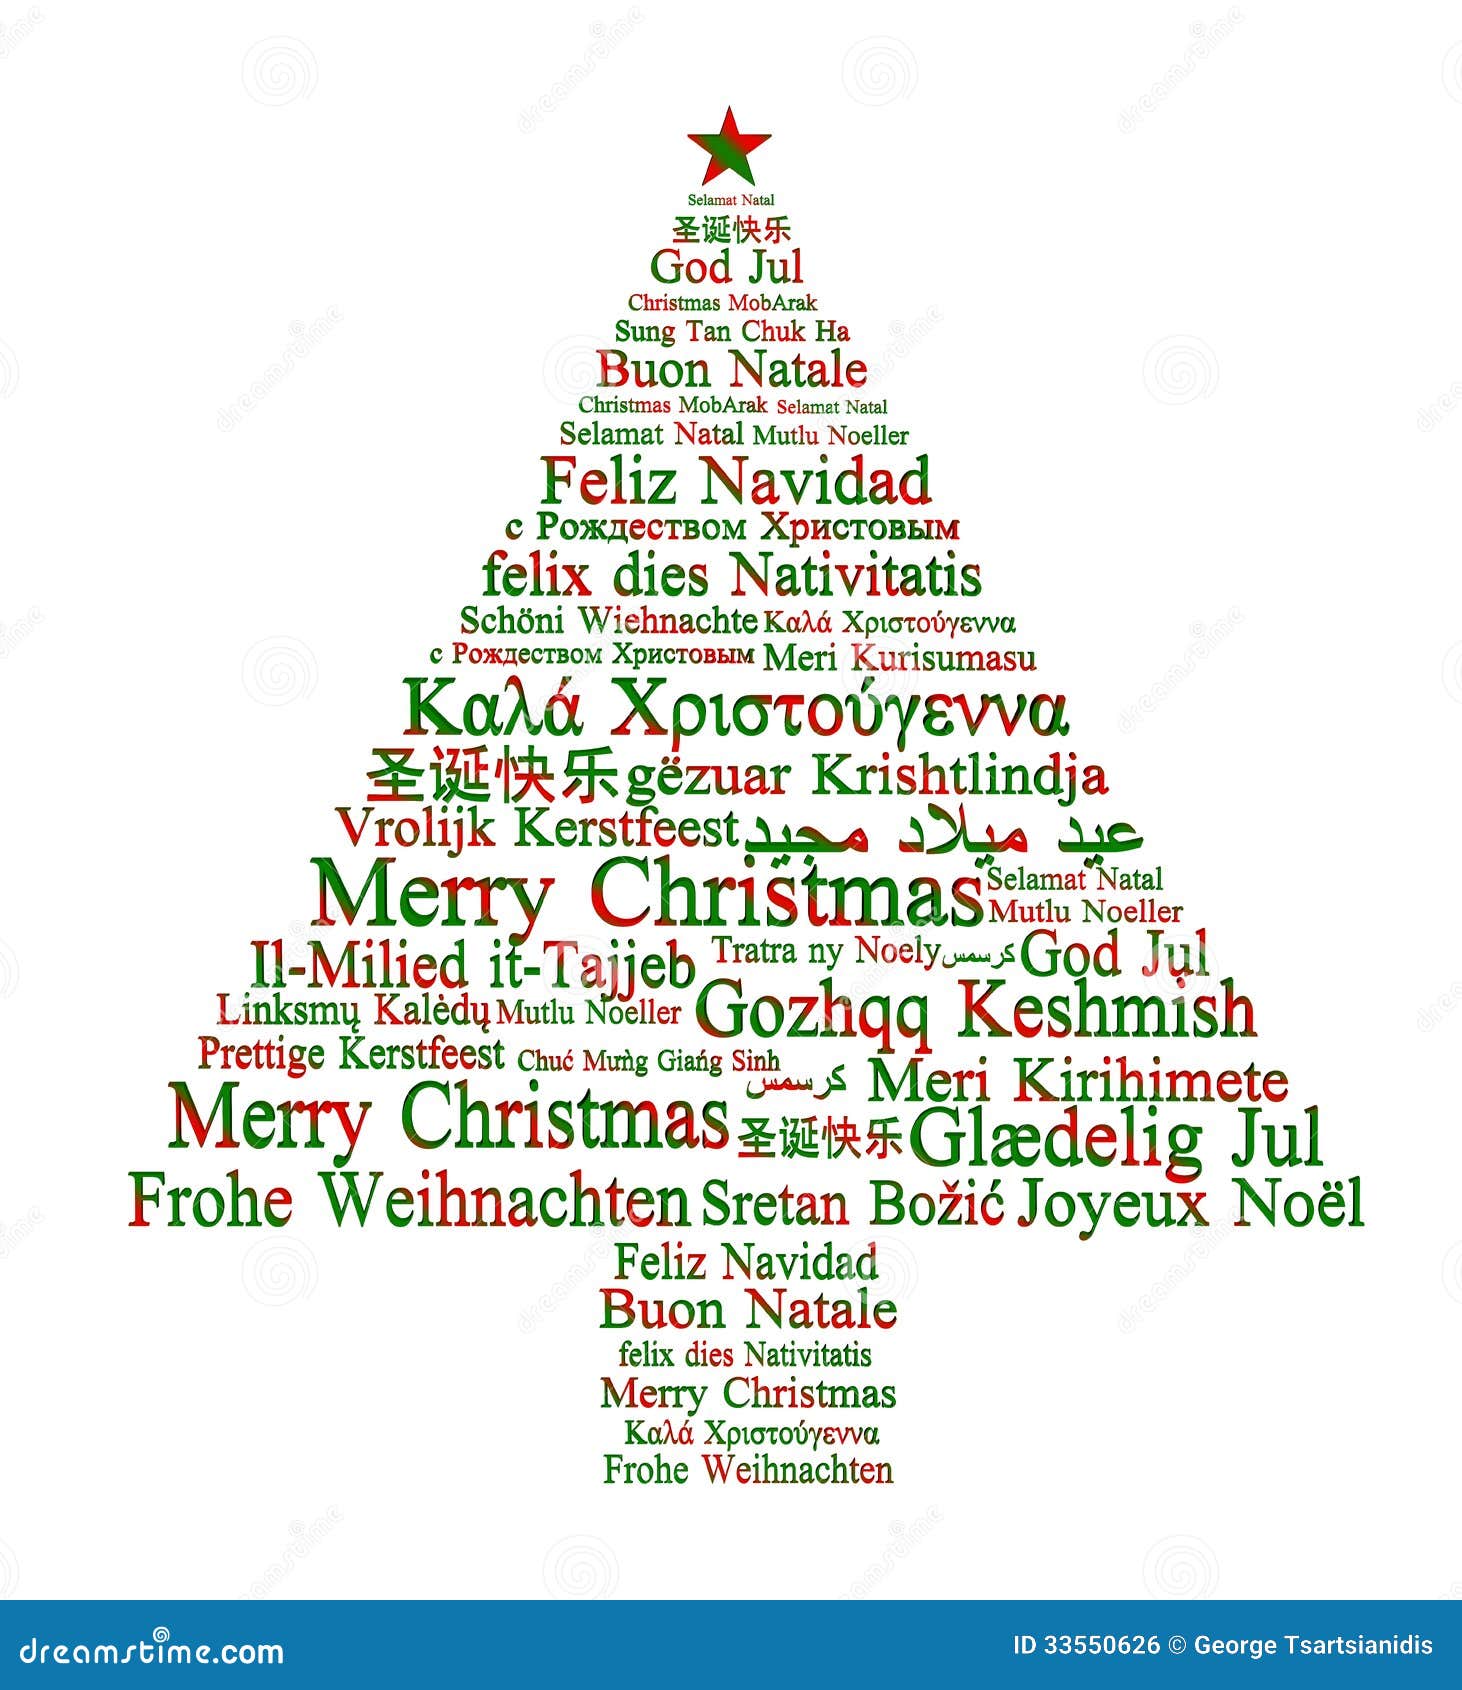 merry-christmas-different-languages-forming-tree-33550626.jpg